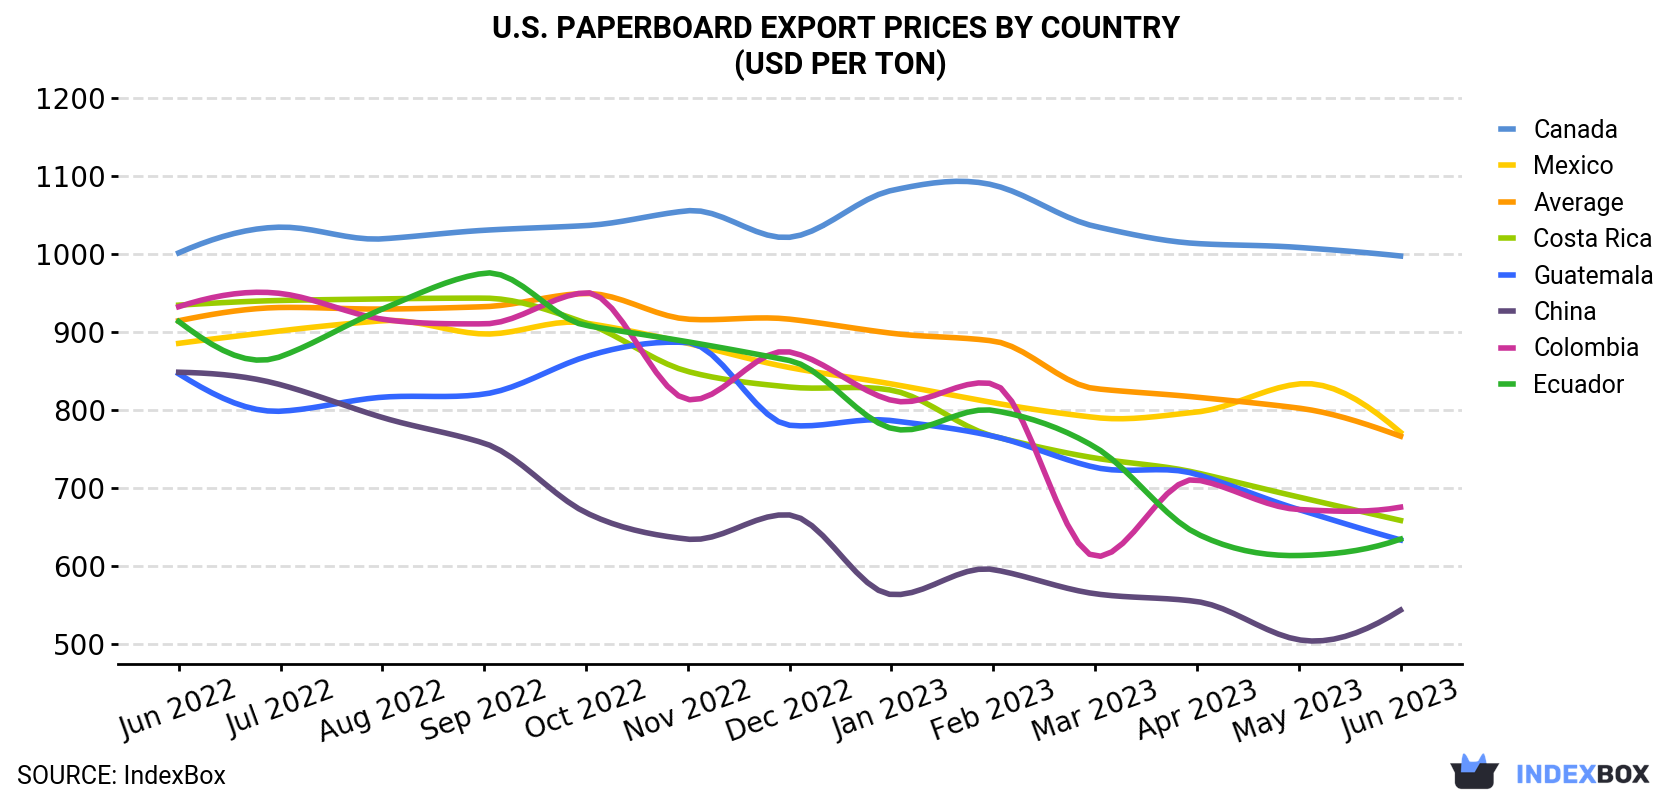 U.S. Paperboard Export Prices By Country (USD Per Ton)